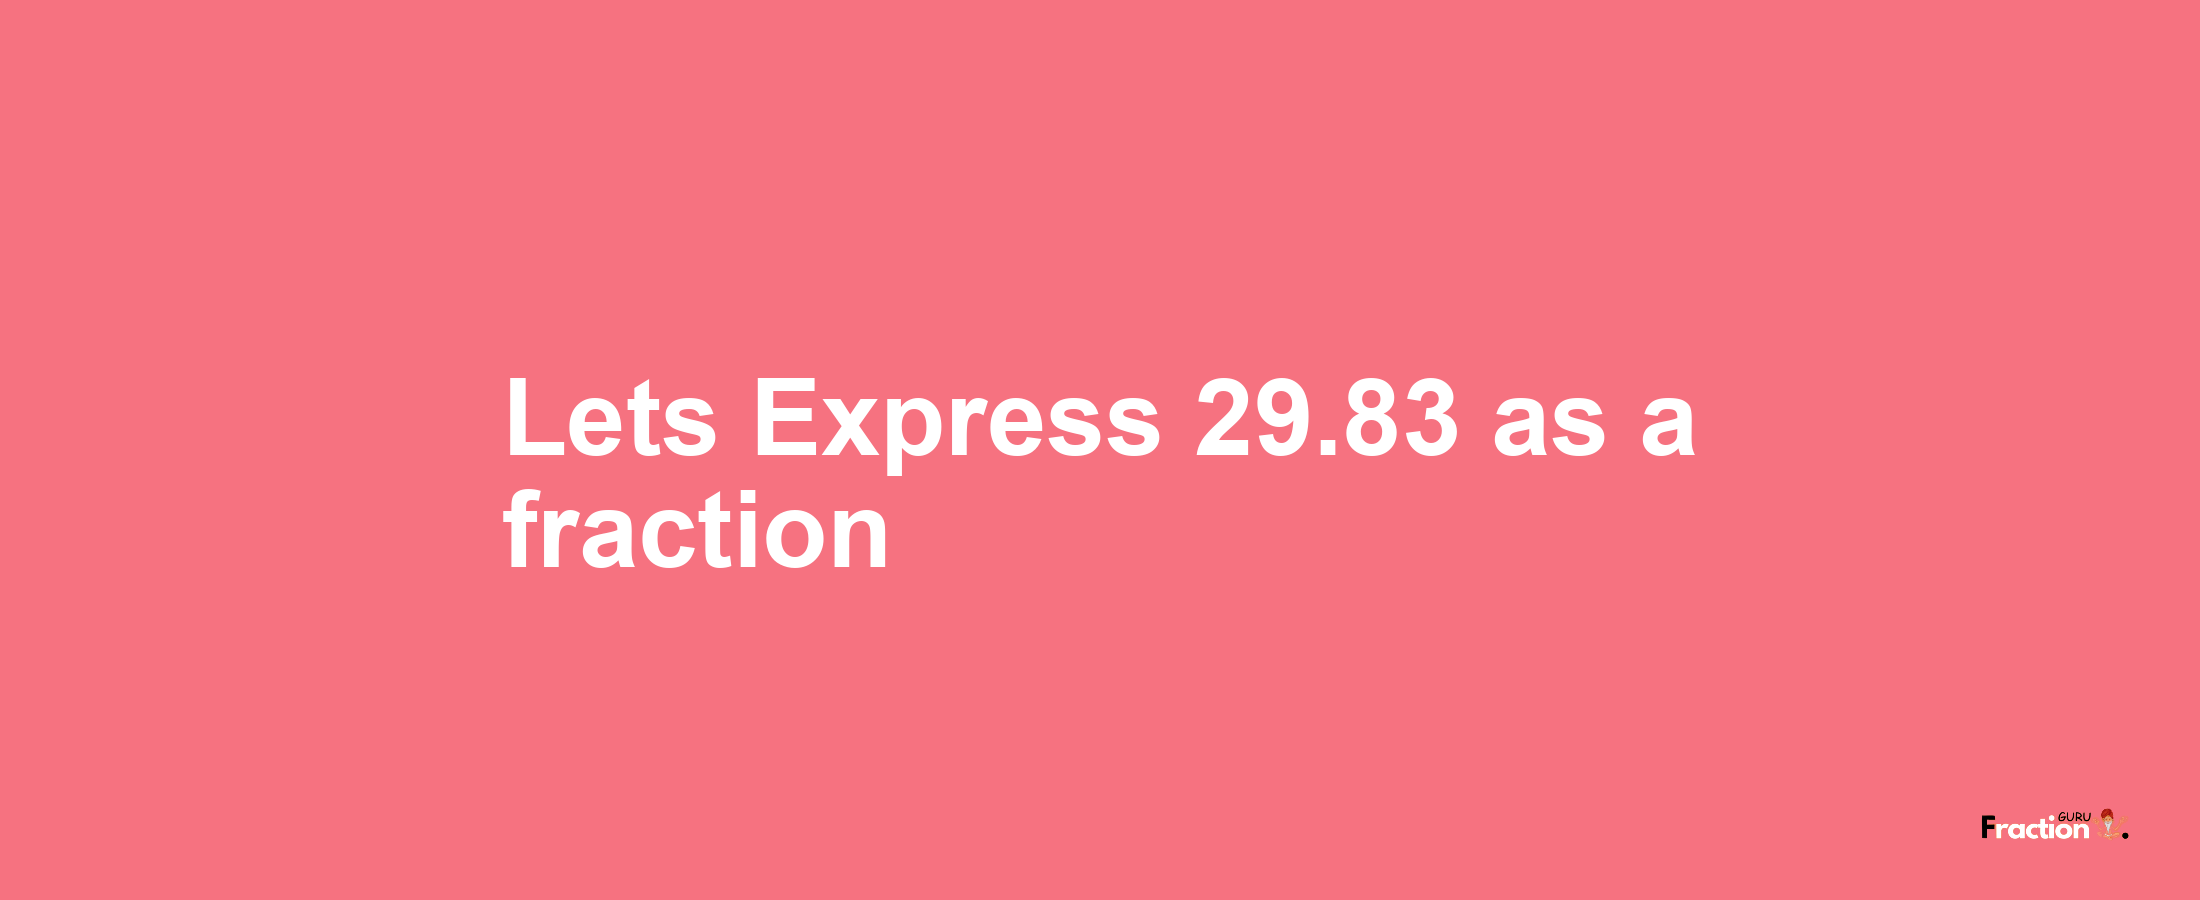 Lets Express 29.83 as afraction